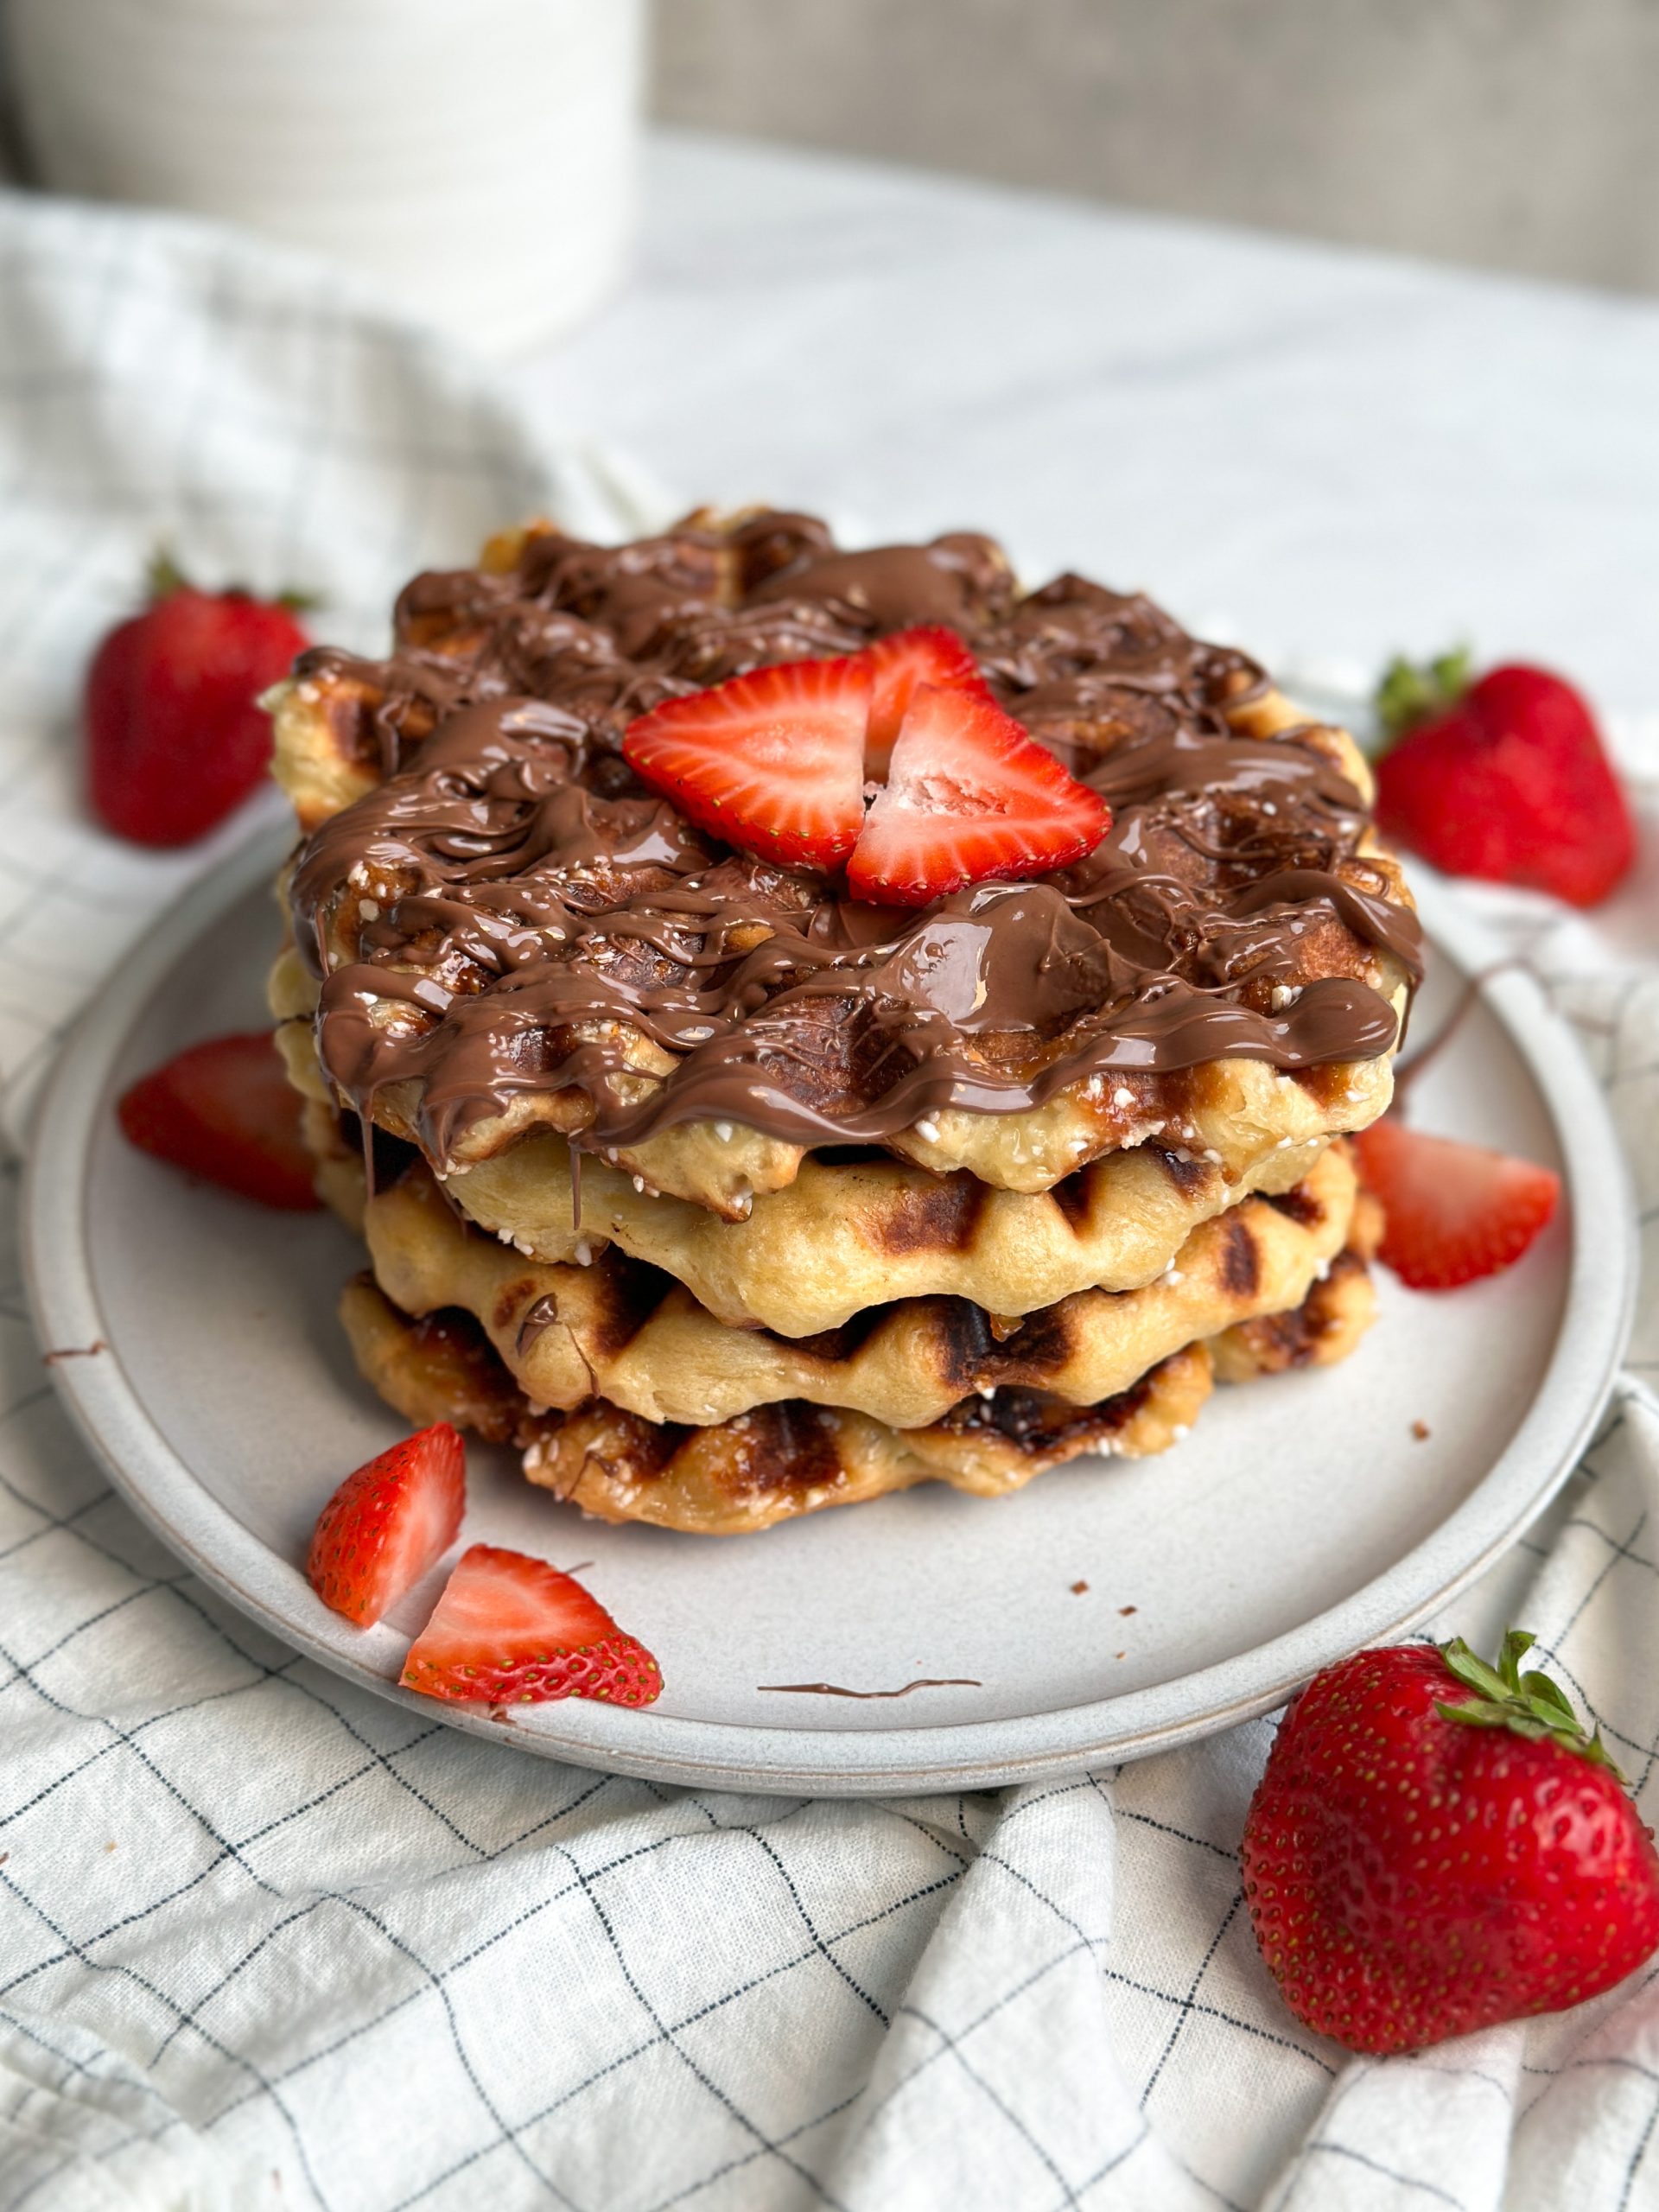 4 Belgian liege waffles stacked on a plate, drizzled with Nutella and covered with chopped strawberries